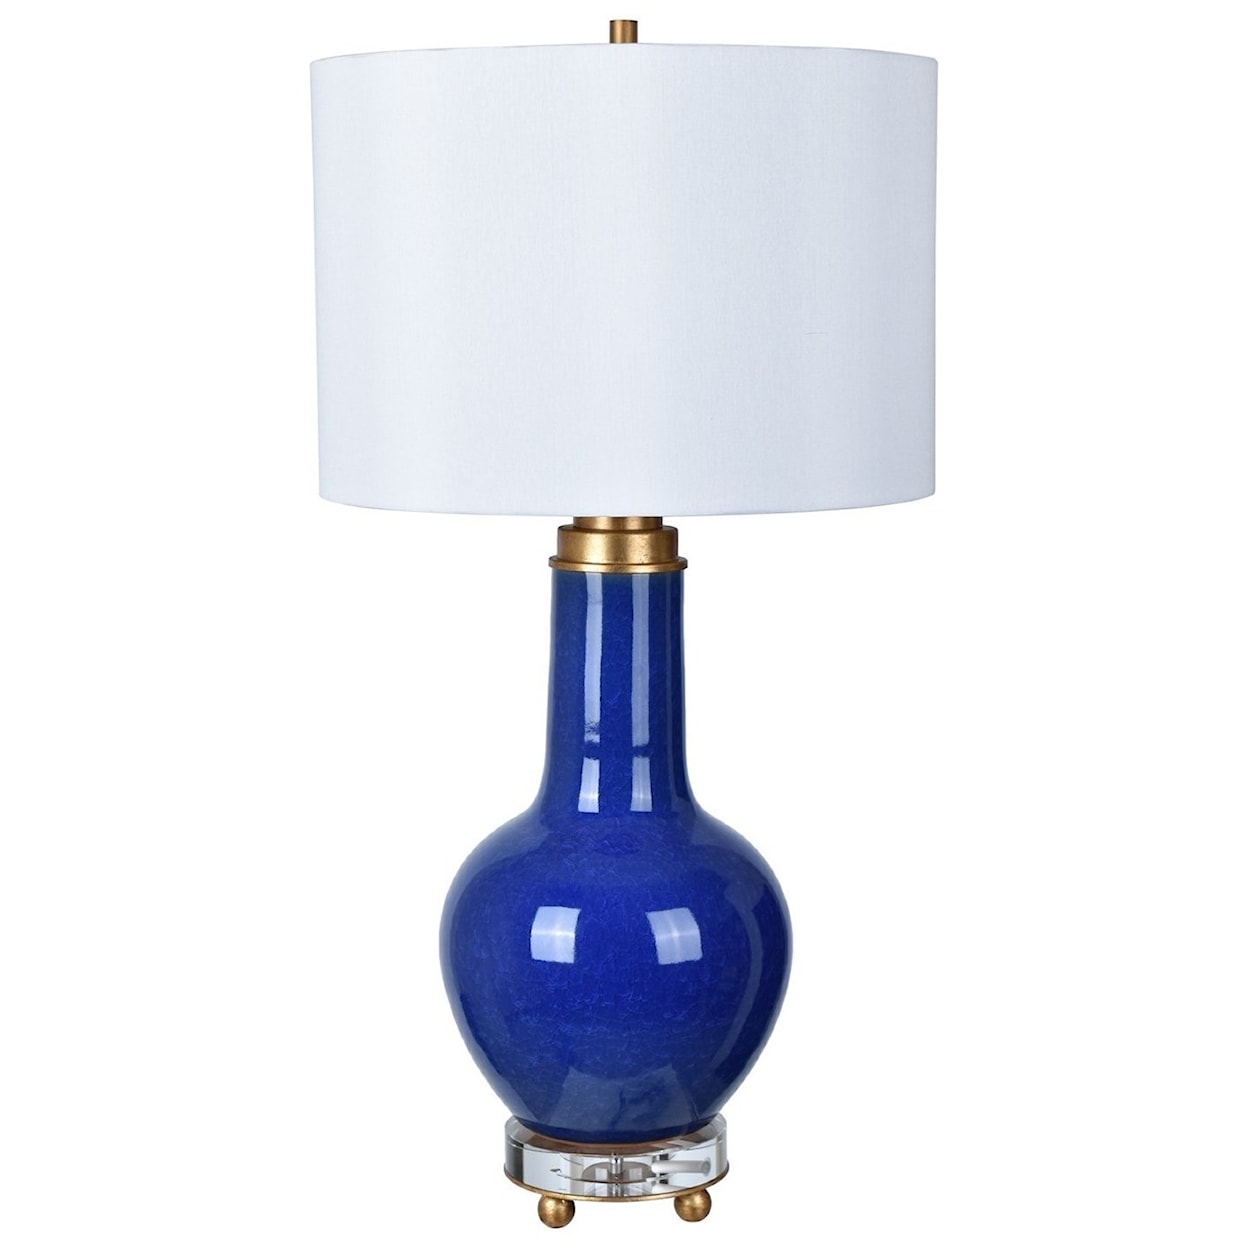 Crestview Collection Lighting Penta Table Lamp